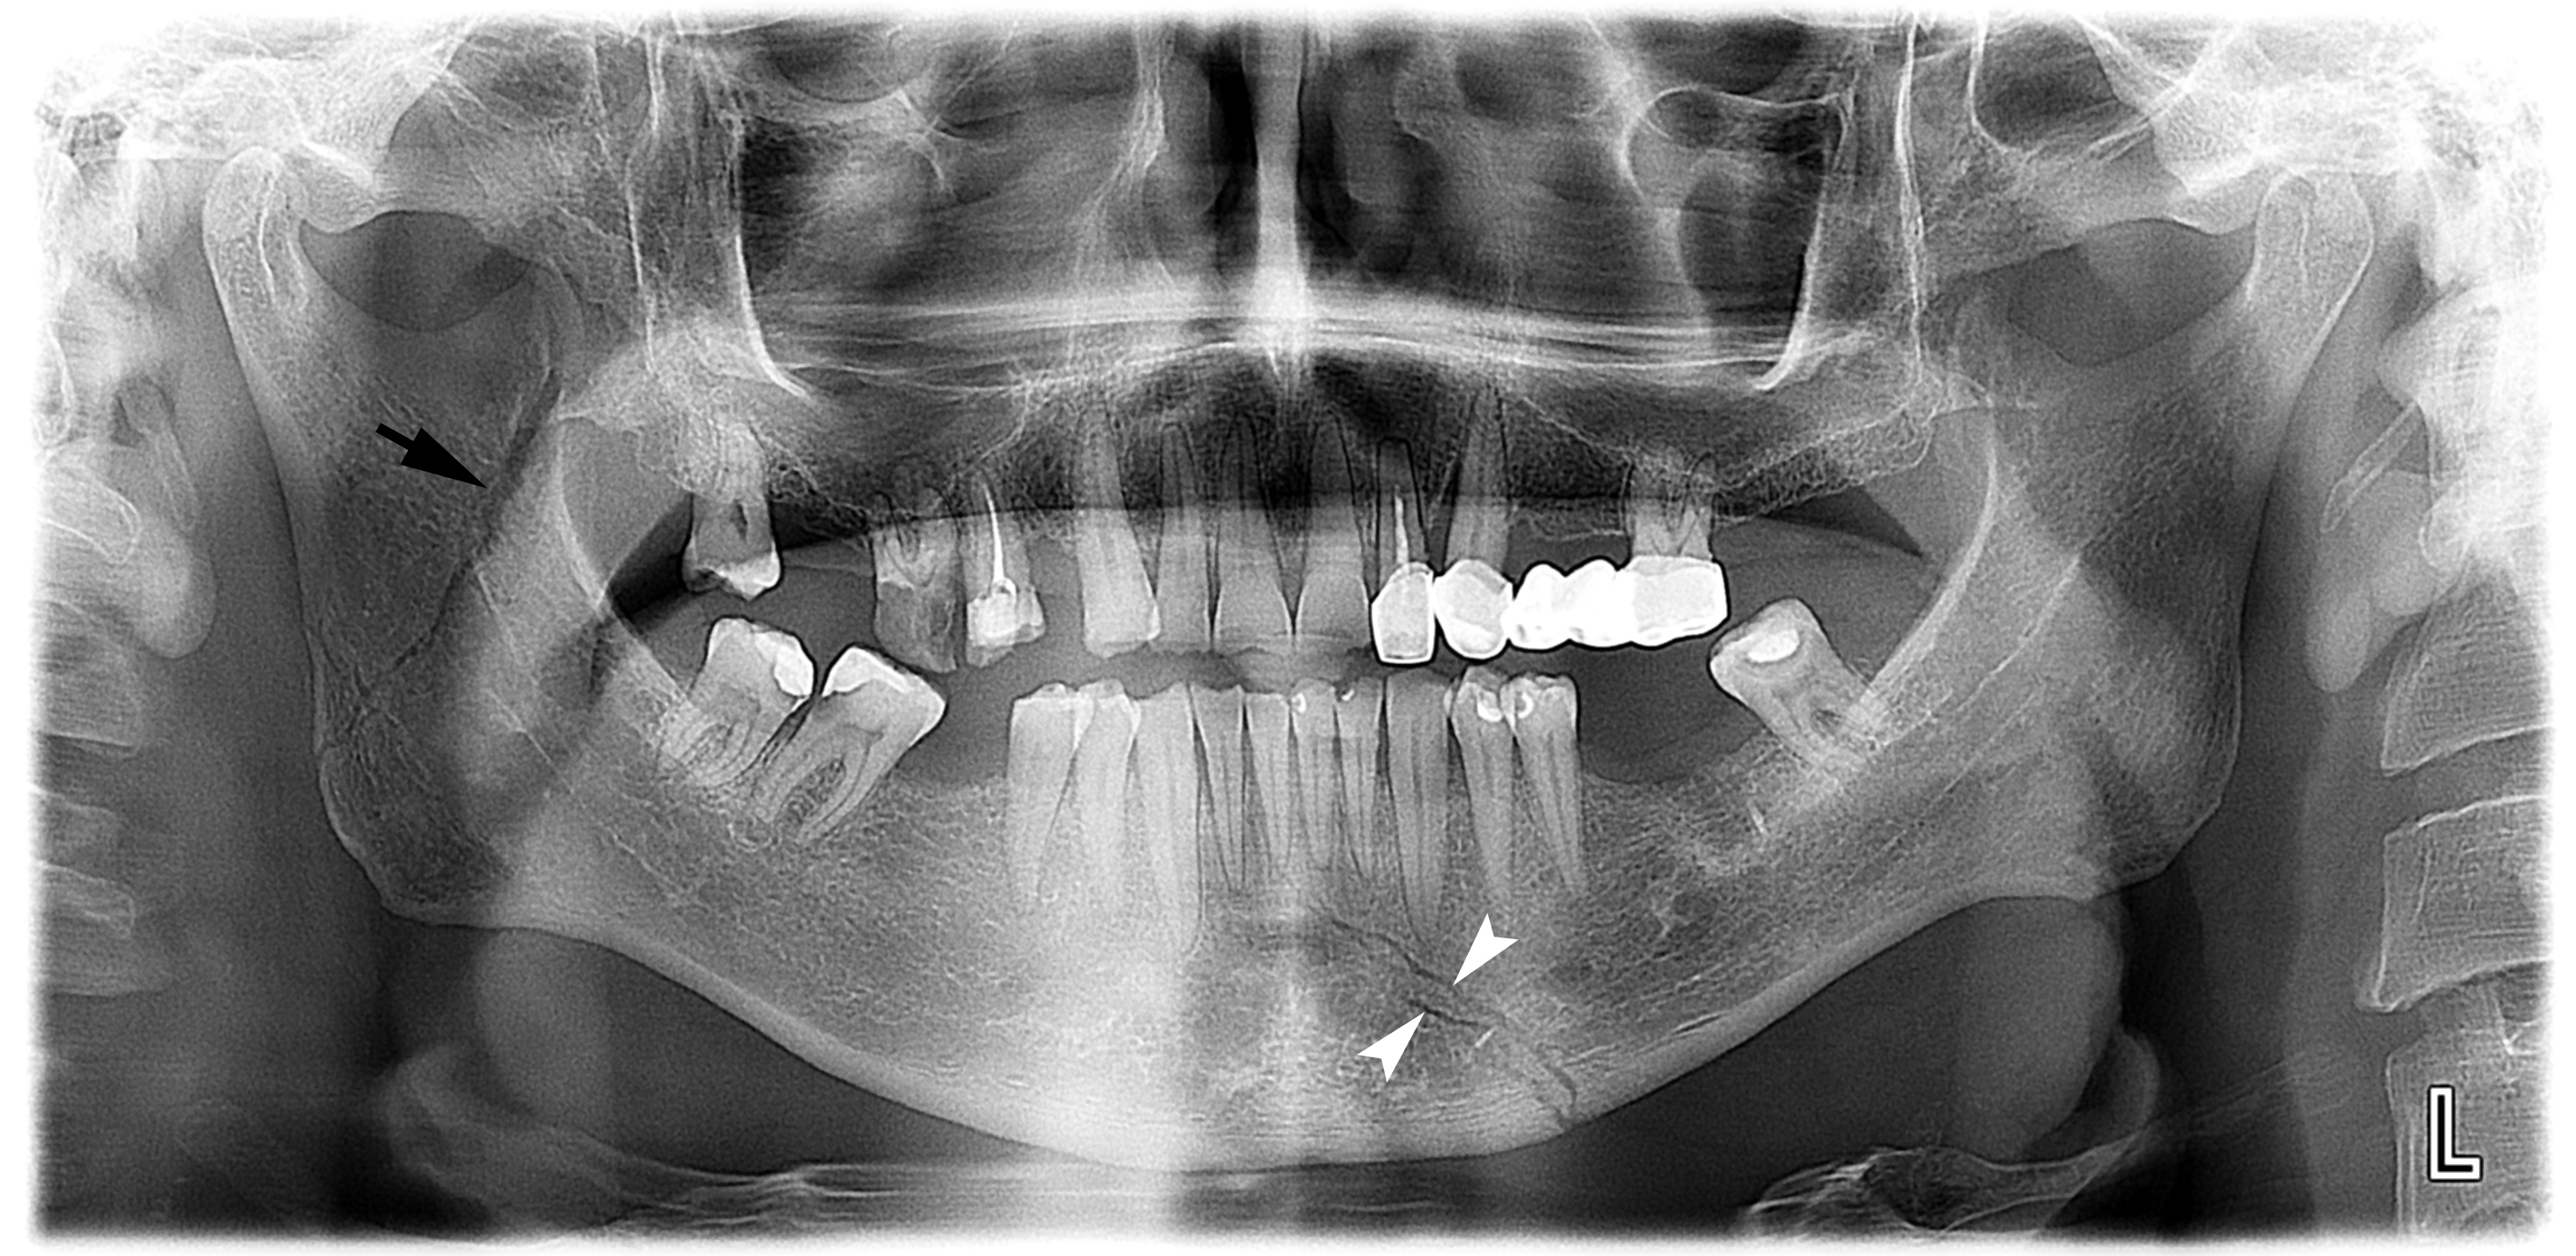 mandible fracture x ray